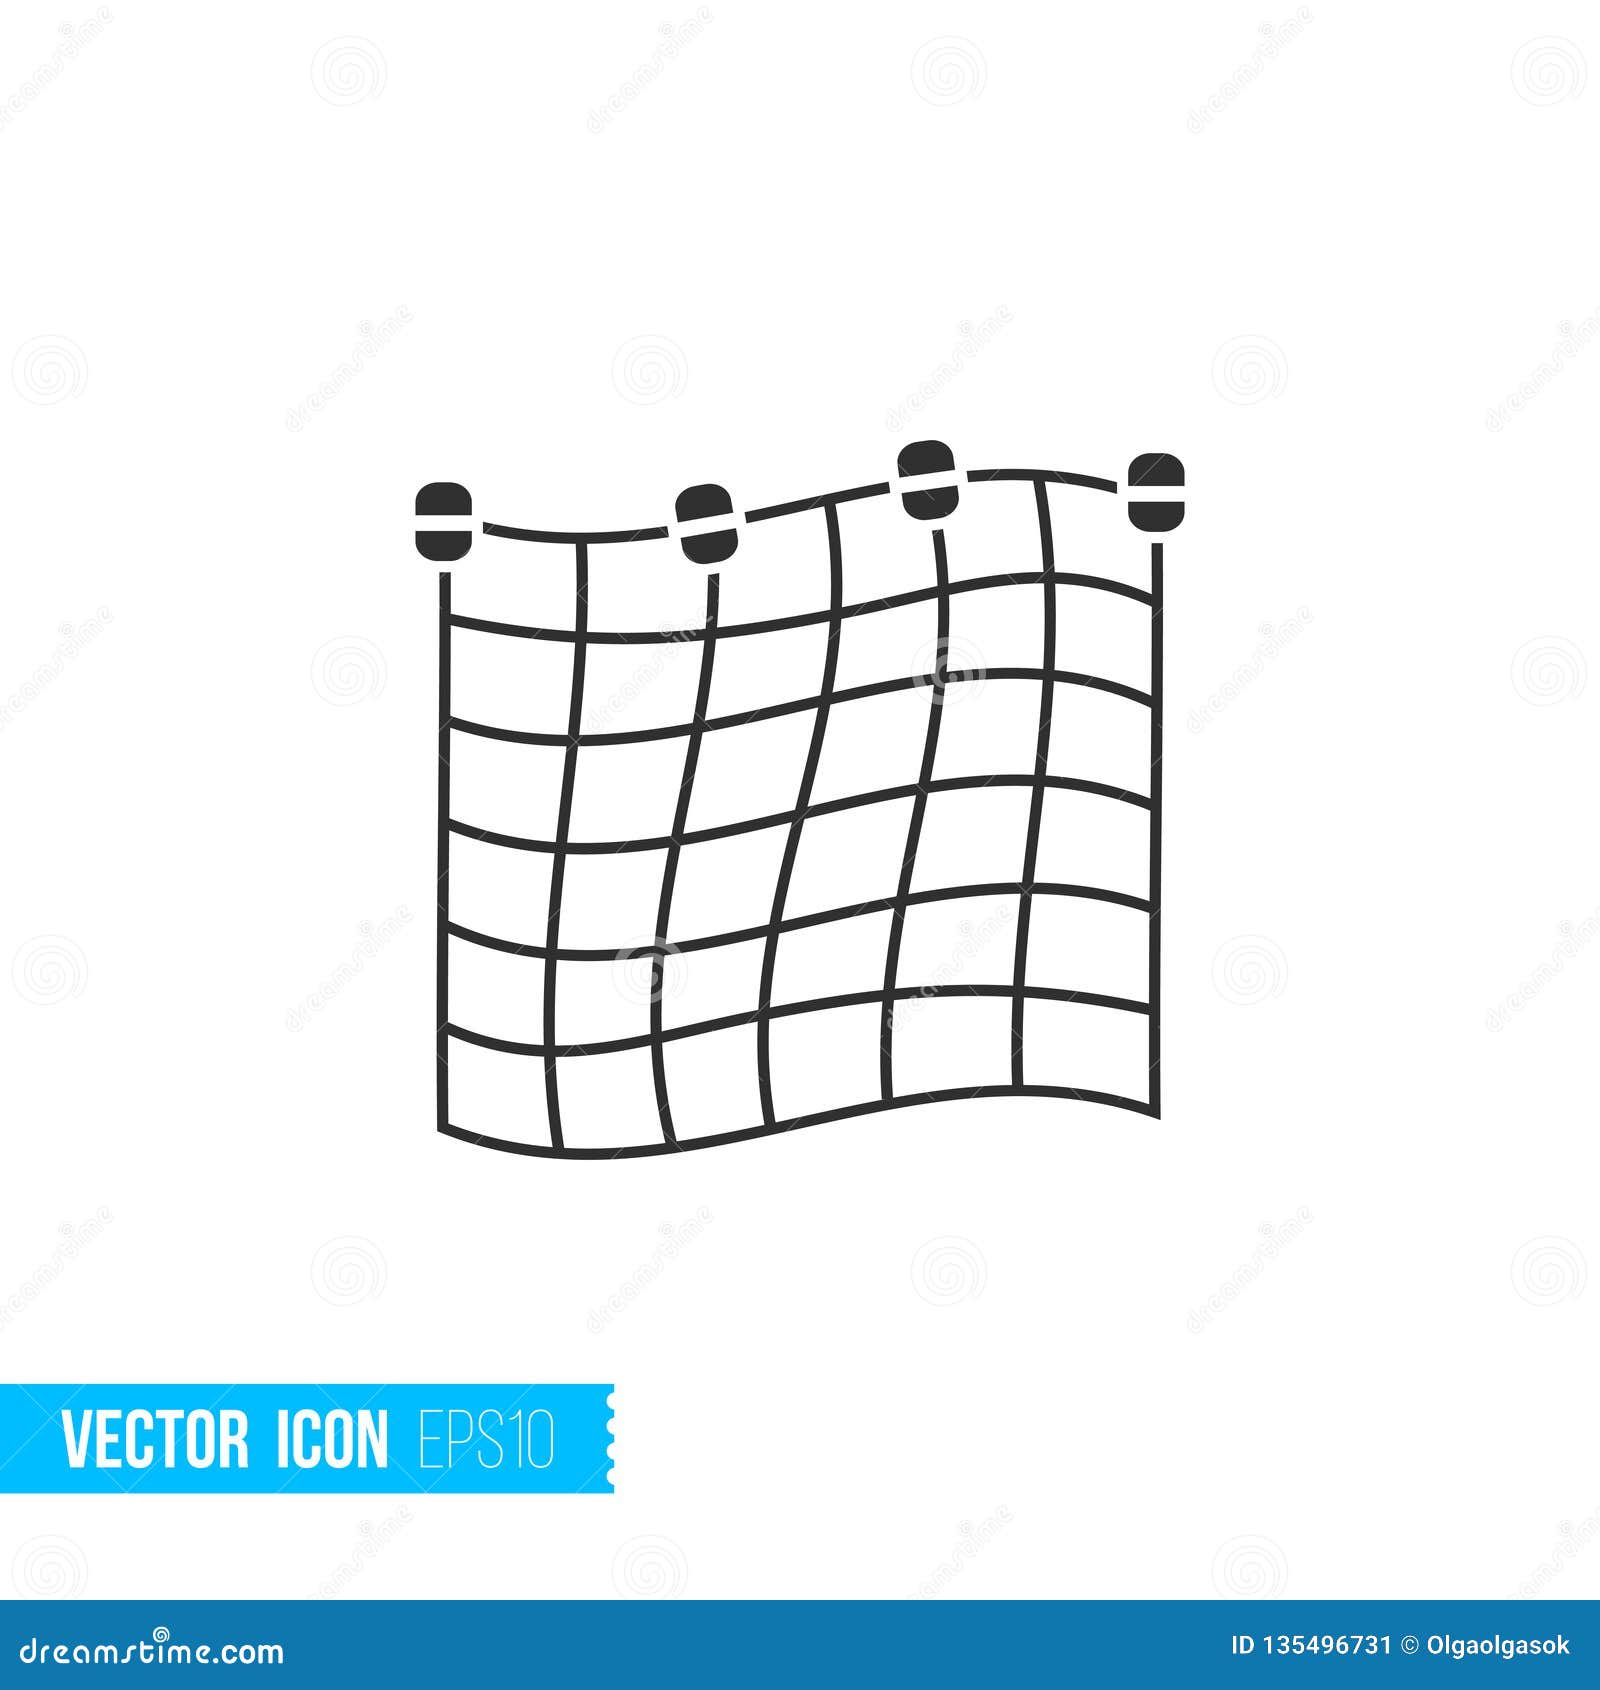 butterfly catcher thin line icon. catcher, fishnet icon.